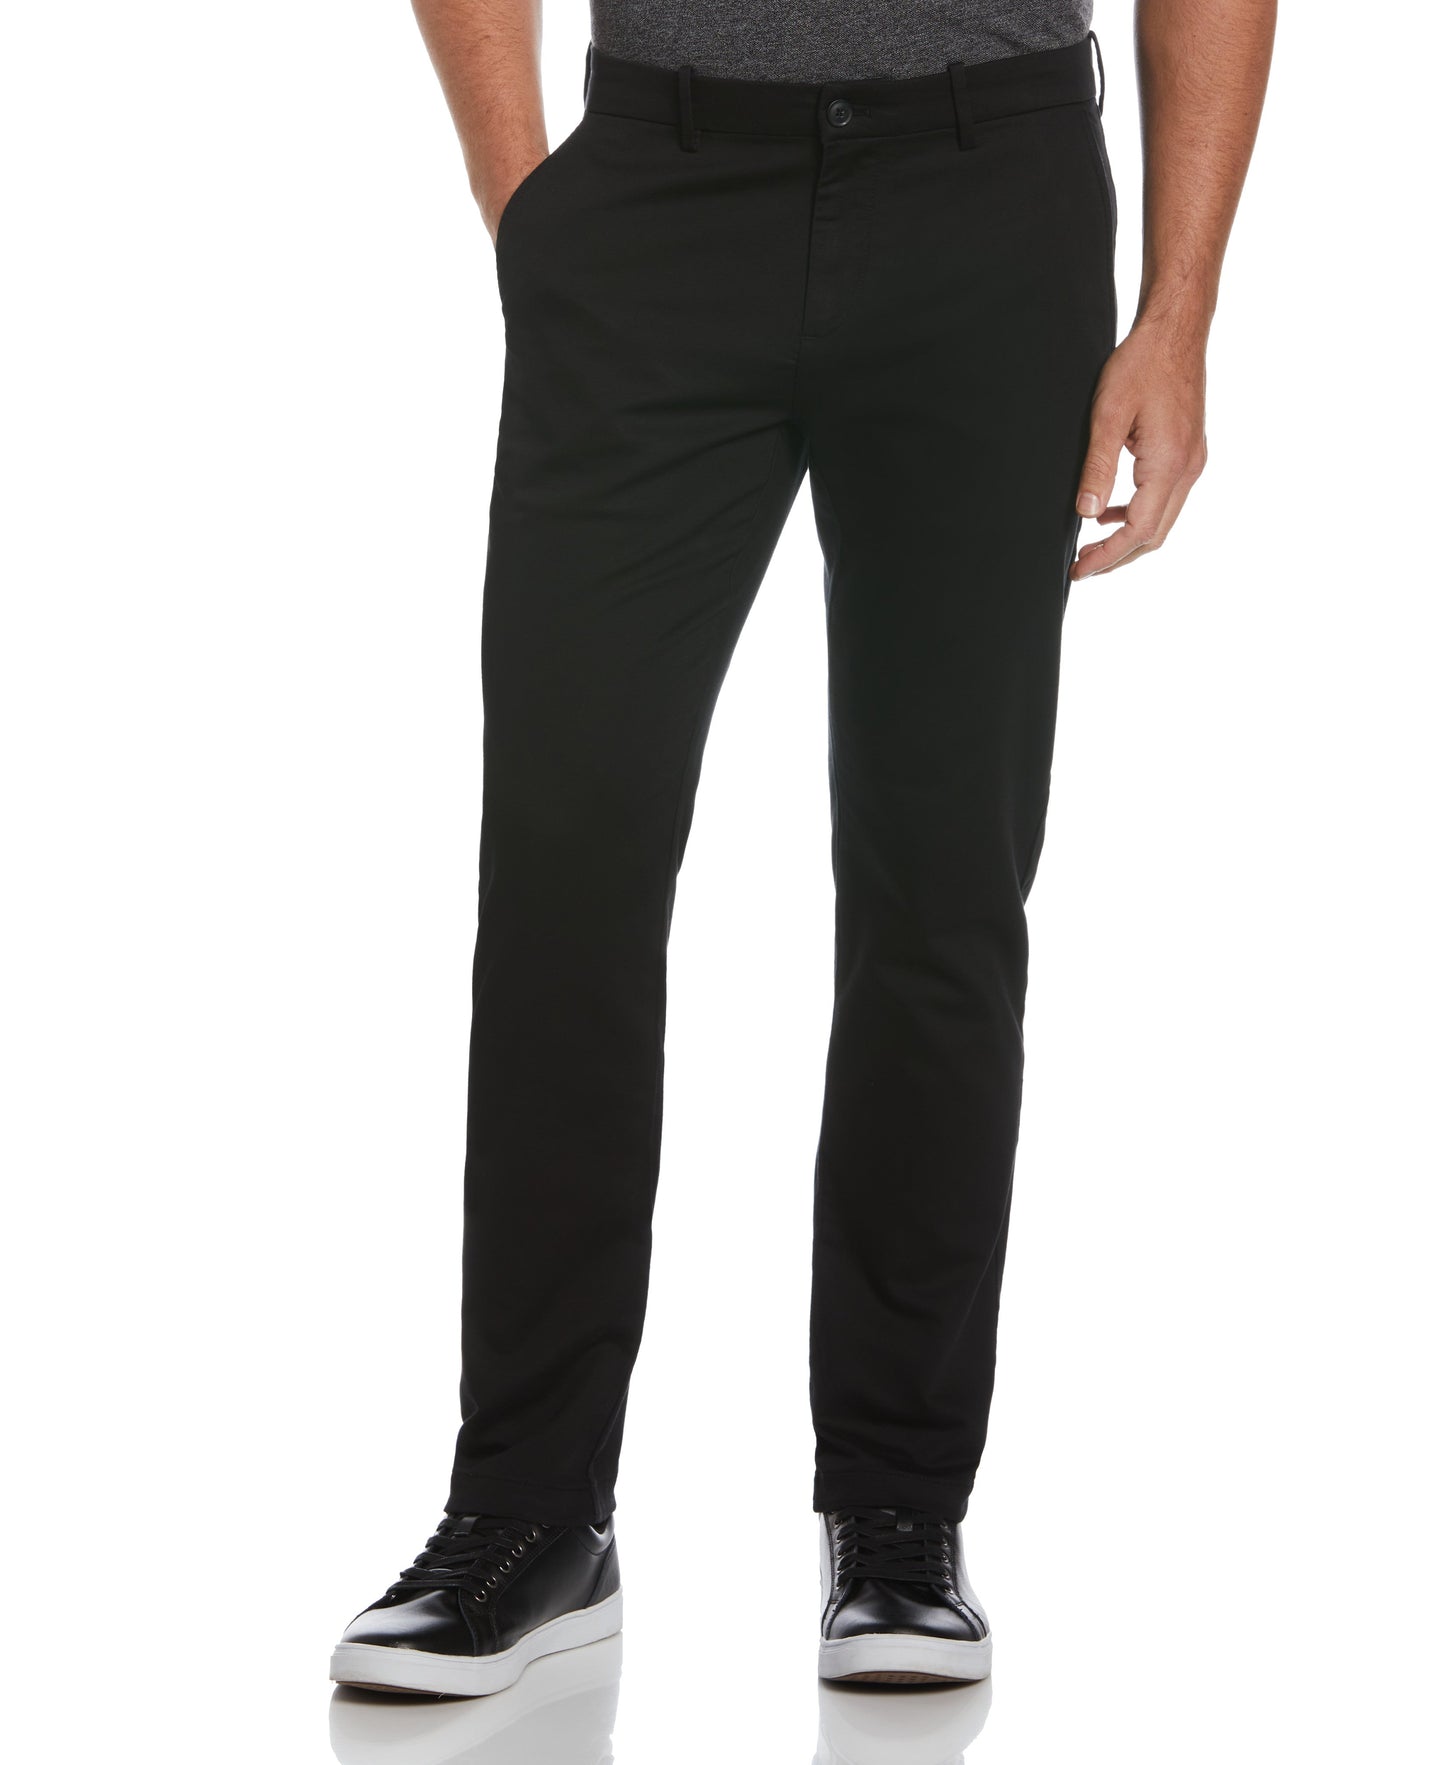 Tall Slim Fit Anywhere Stretch Chino Pant